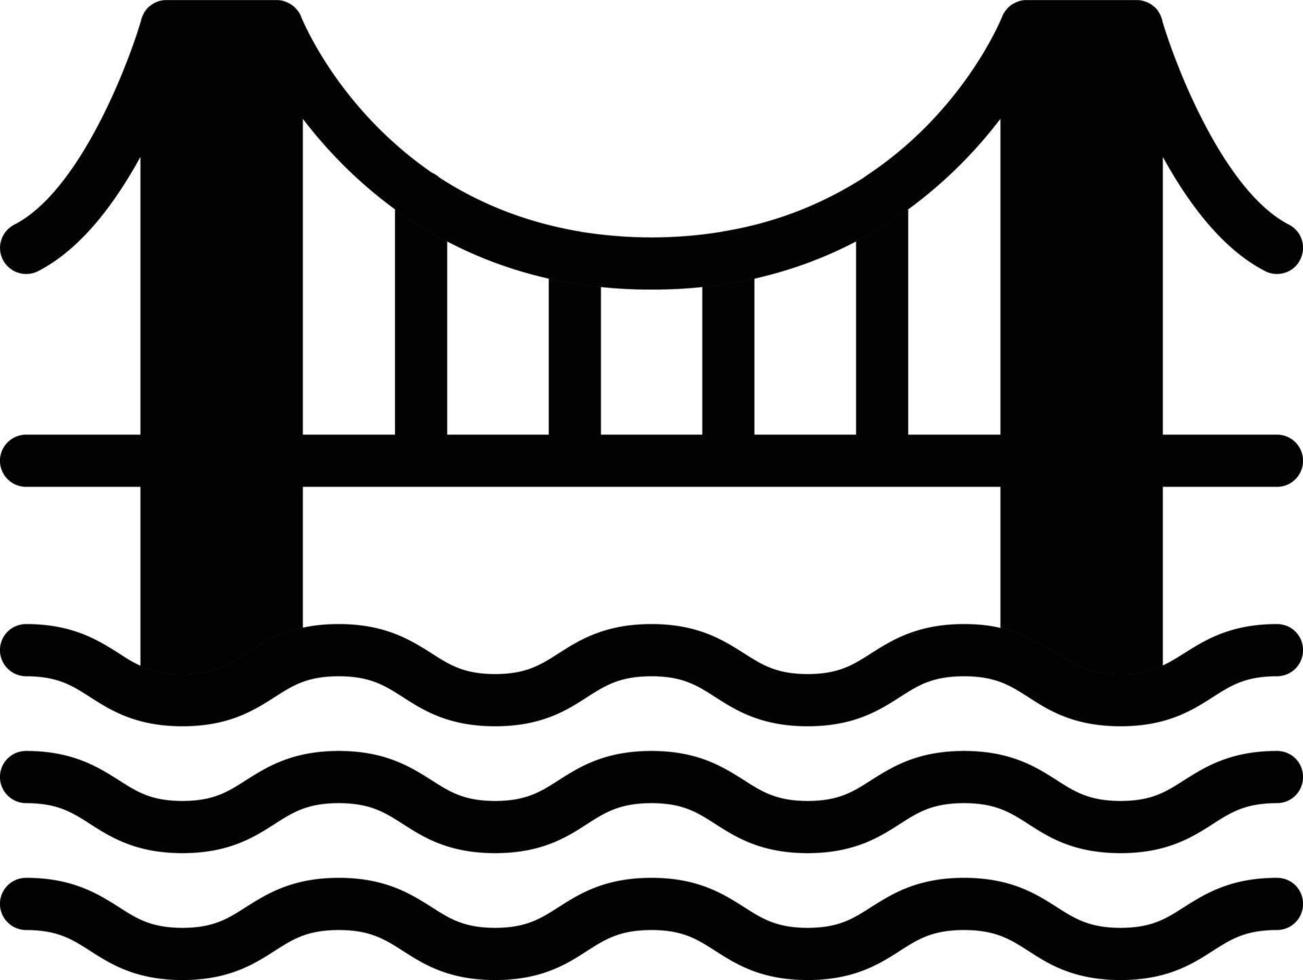 river bridge vector illustration on a background.Premium quality symbols.vector icons for concept and graphic design.